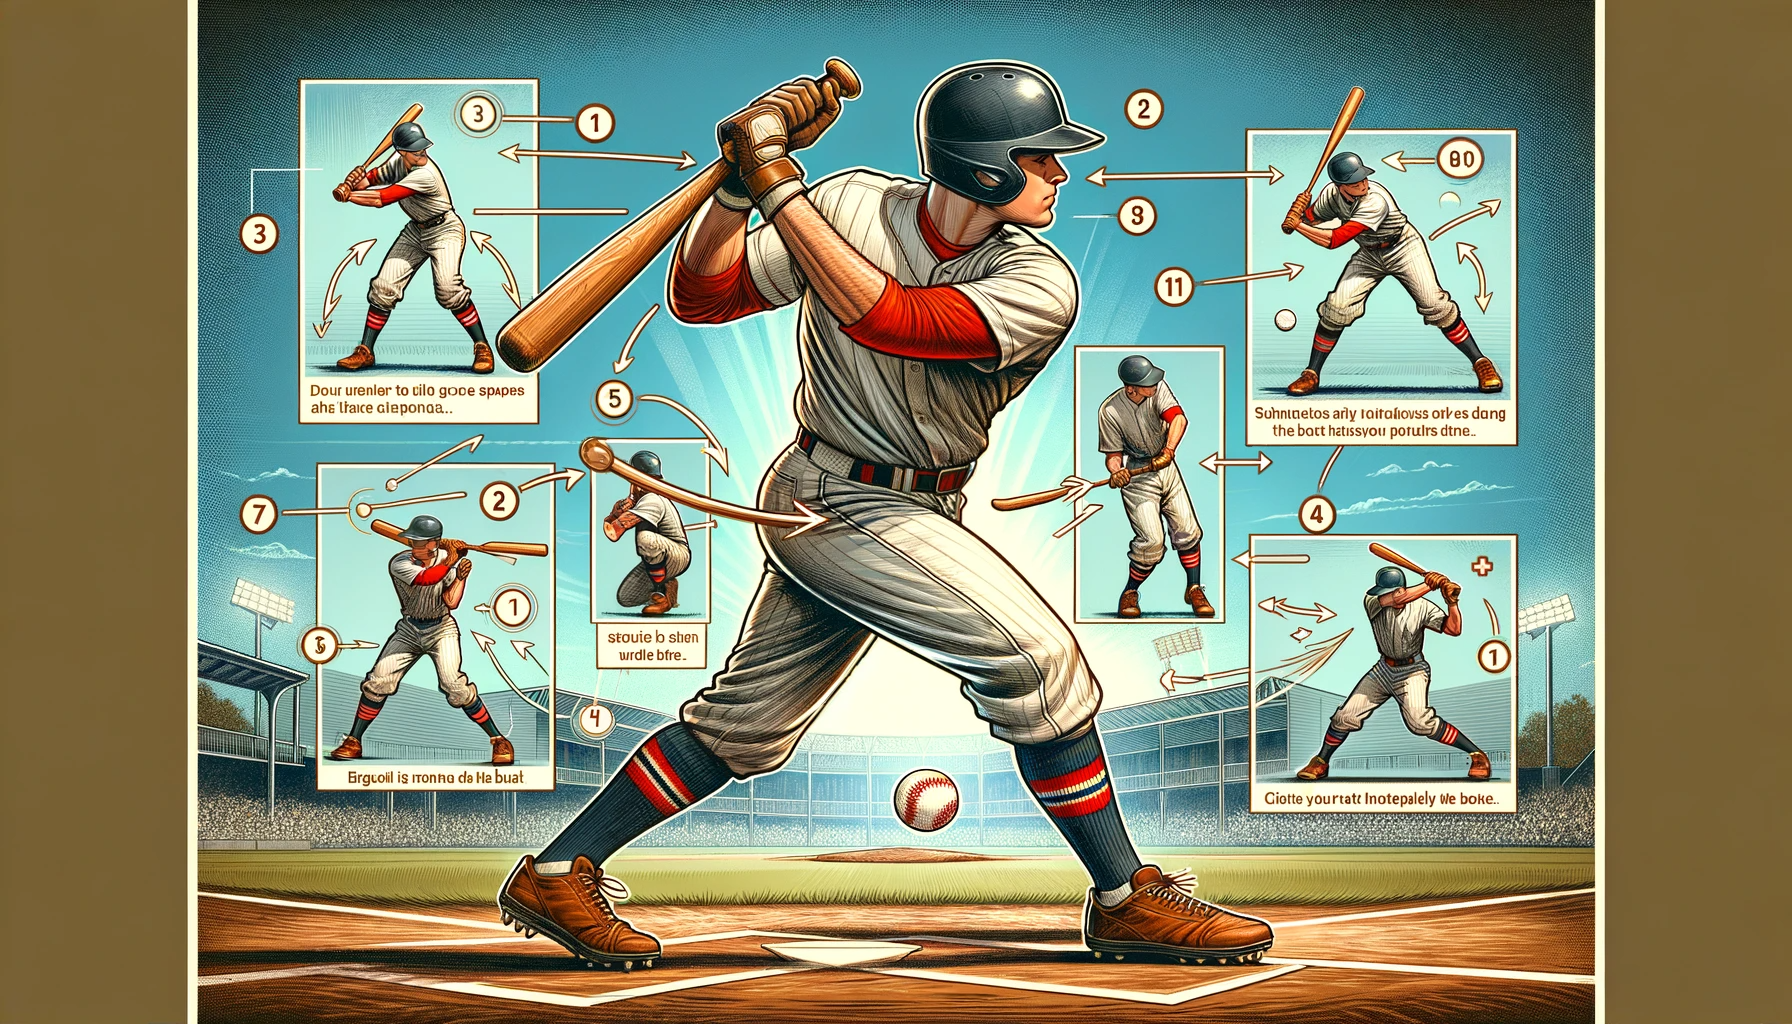 How to Properly Swing a Baseball Bat? A Step-By-Step Guide!